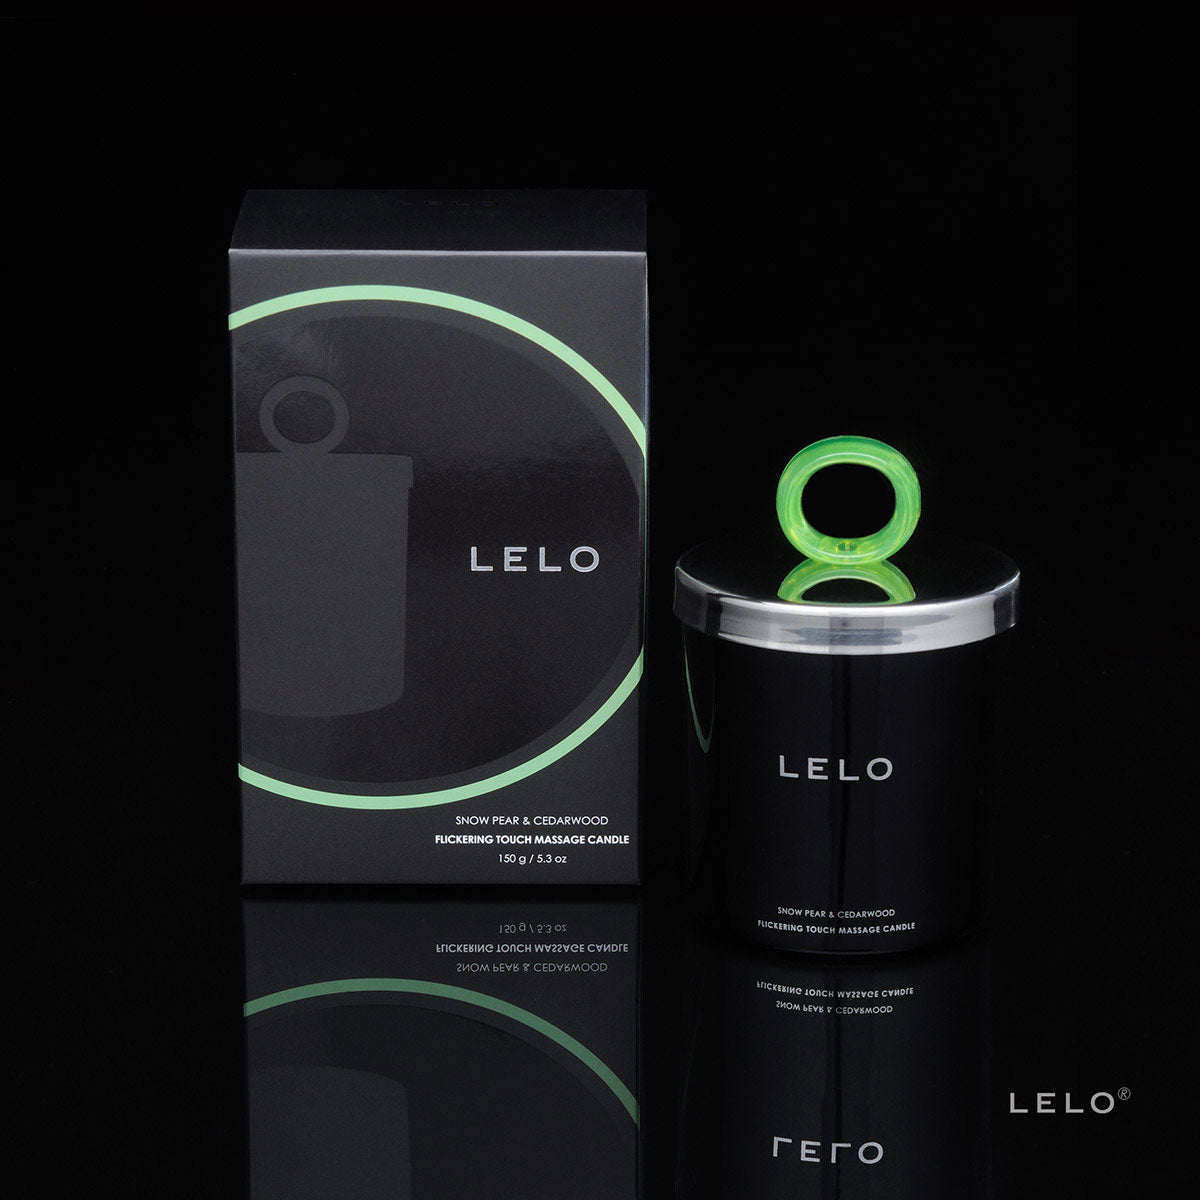 LELO Lubes & Enhancements LELO Flickering Touch Massage Candle - Snow Pear & Cedarwood